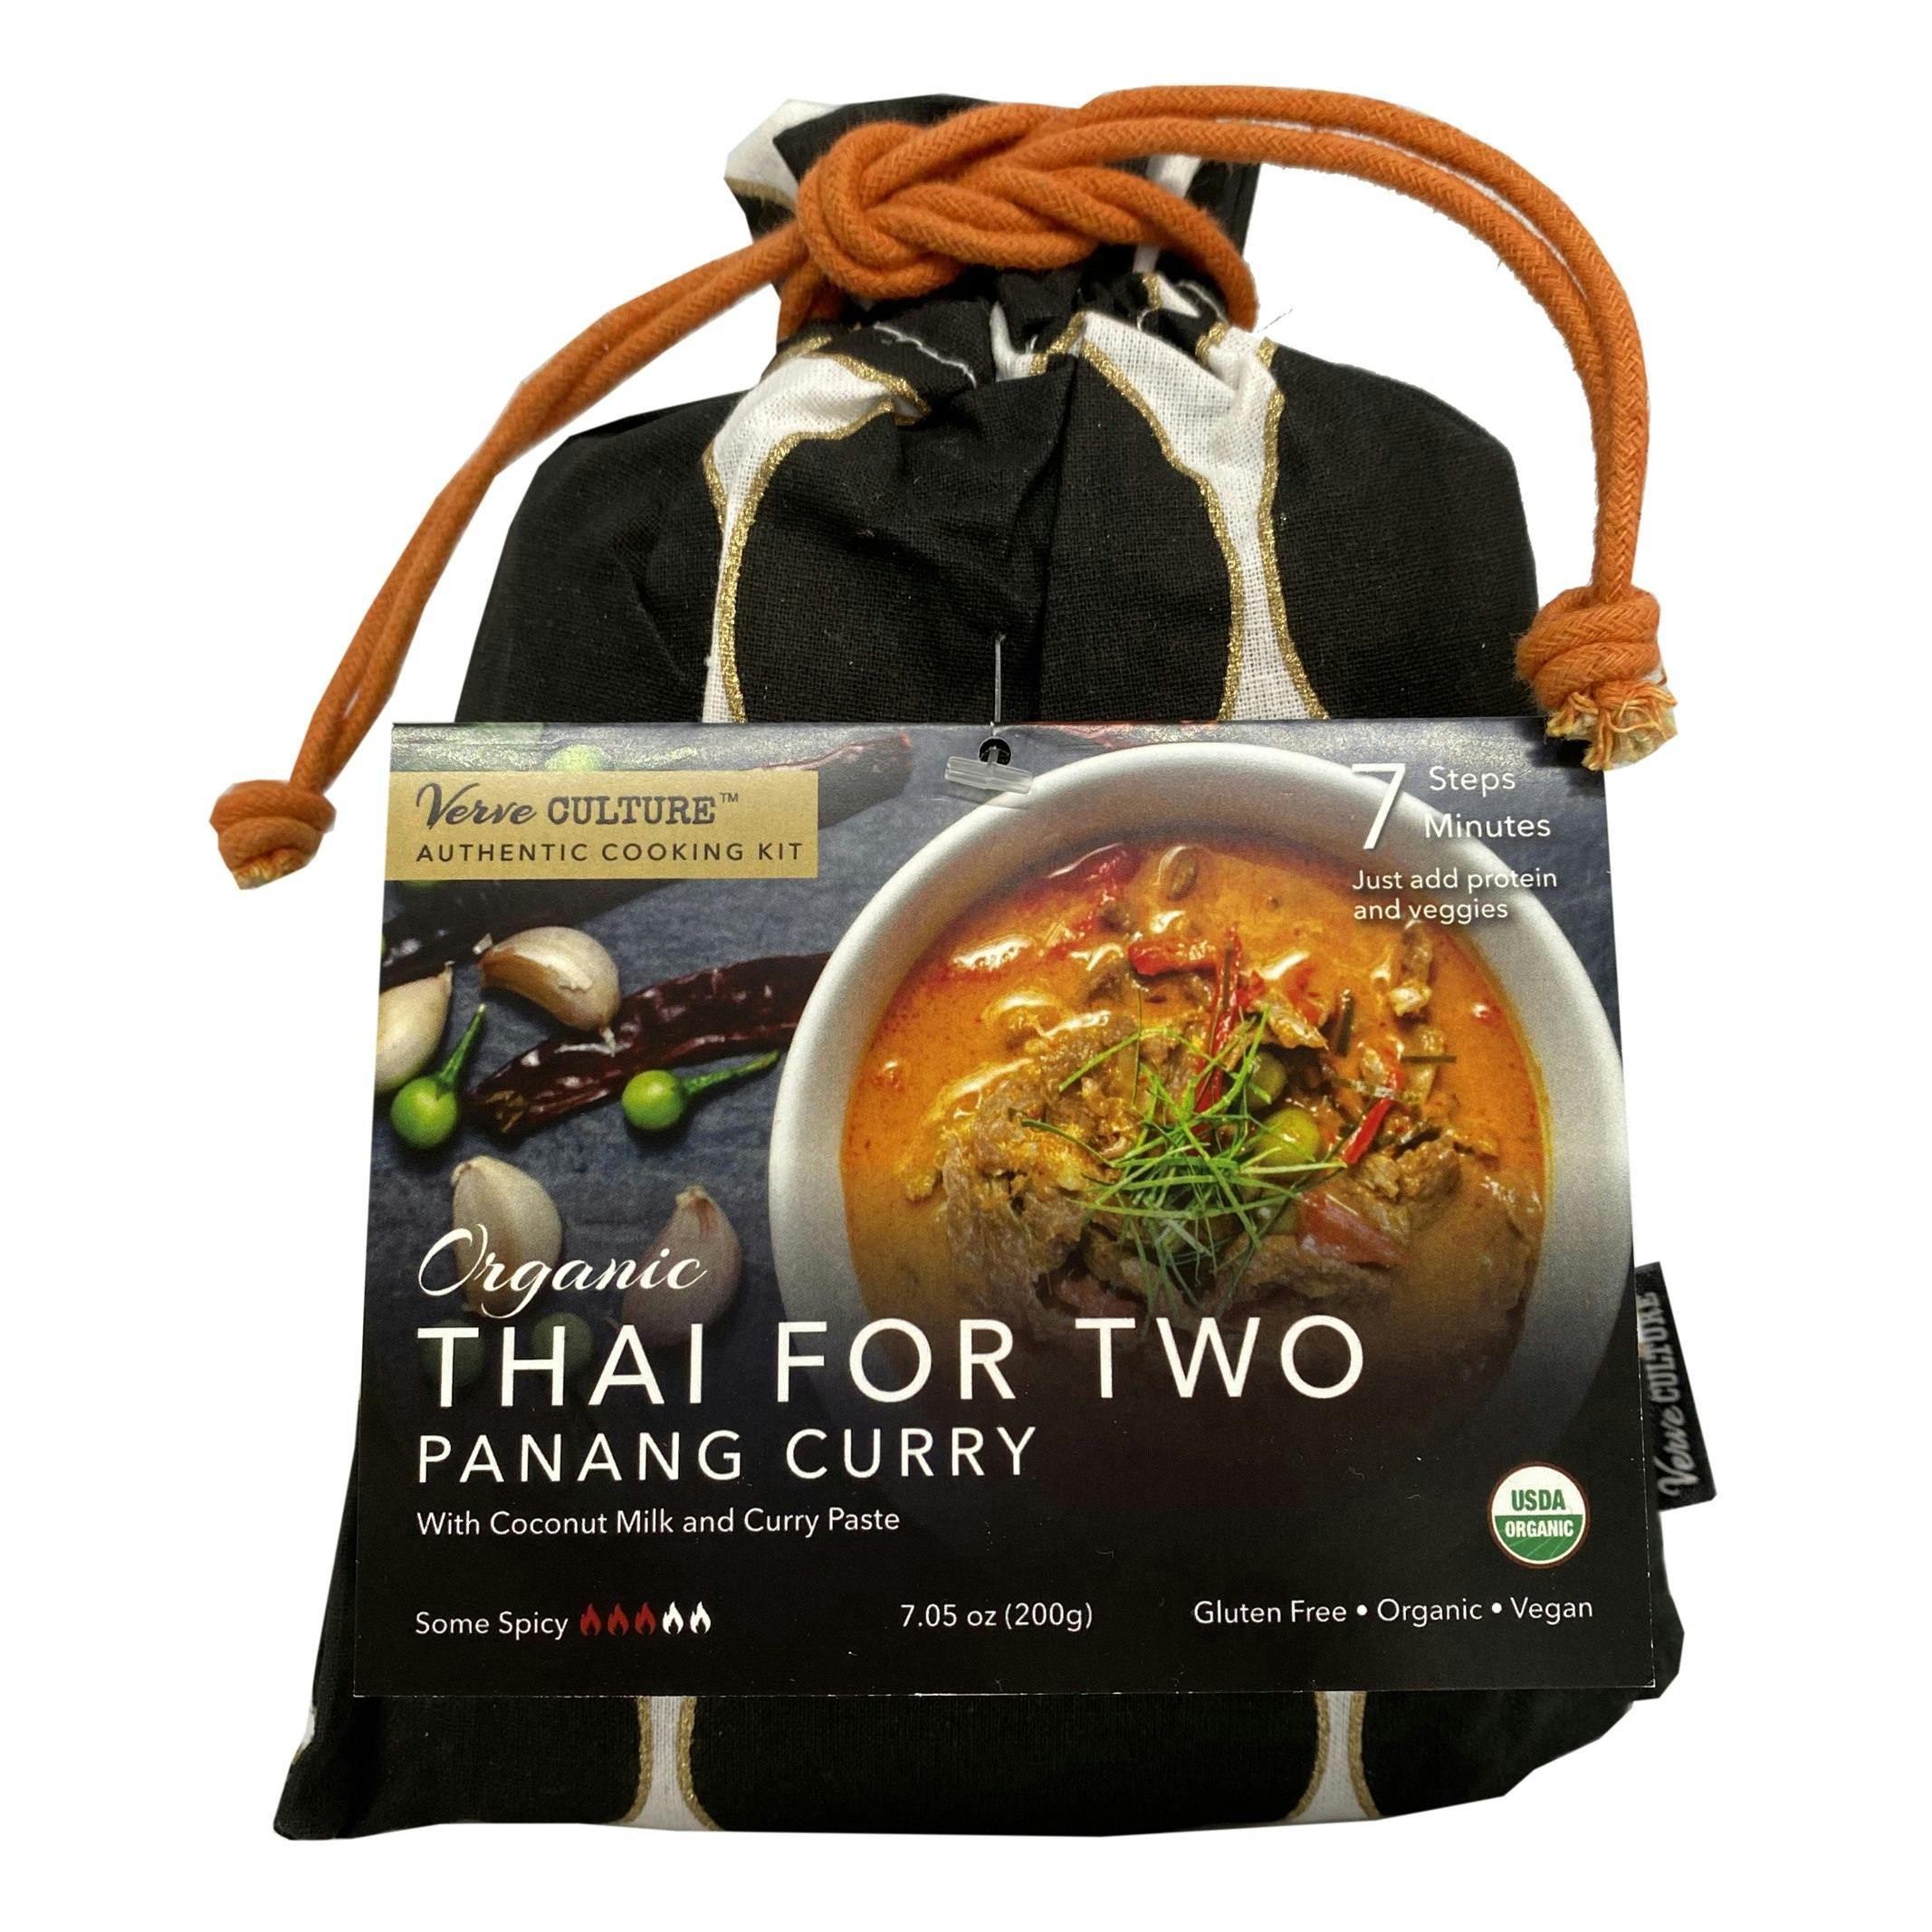 Thai for Two Cooking Kit - Panang Curry